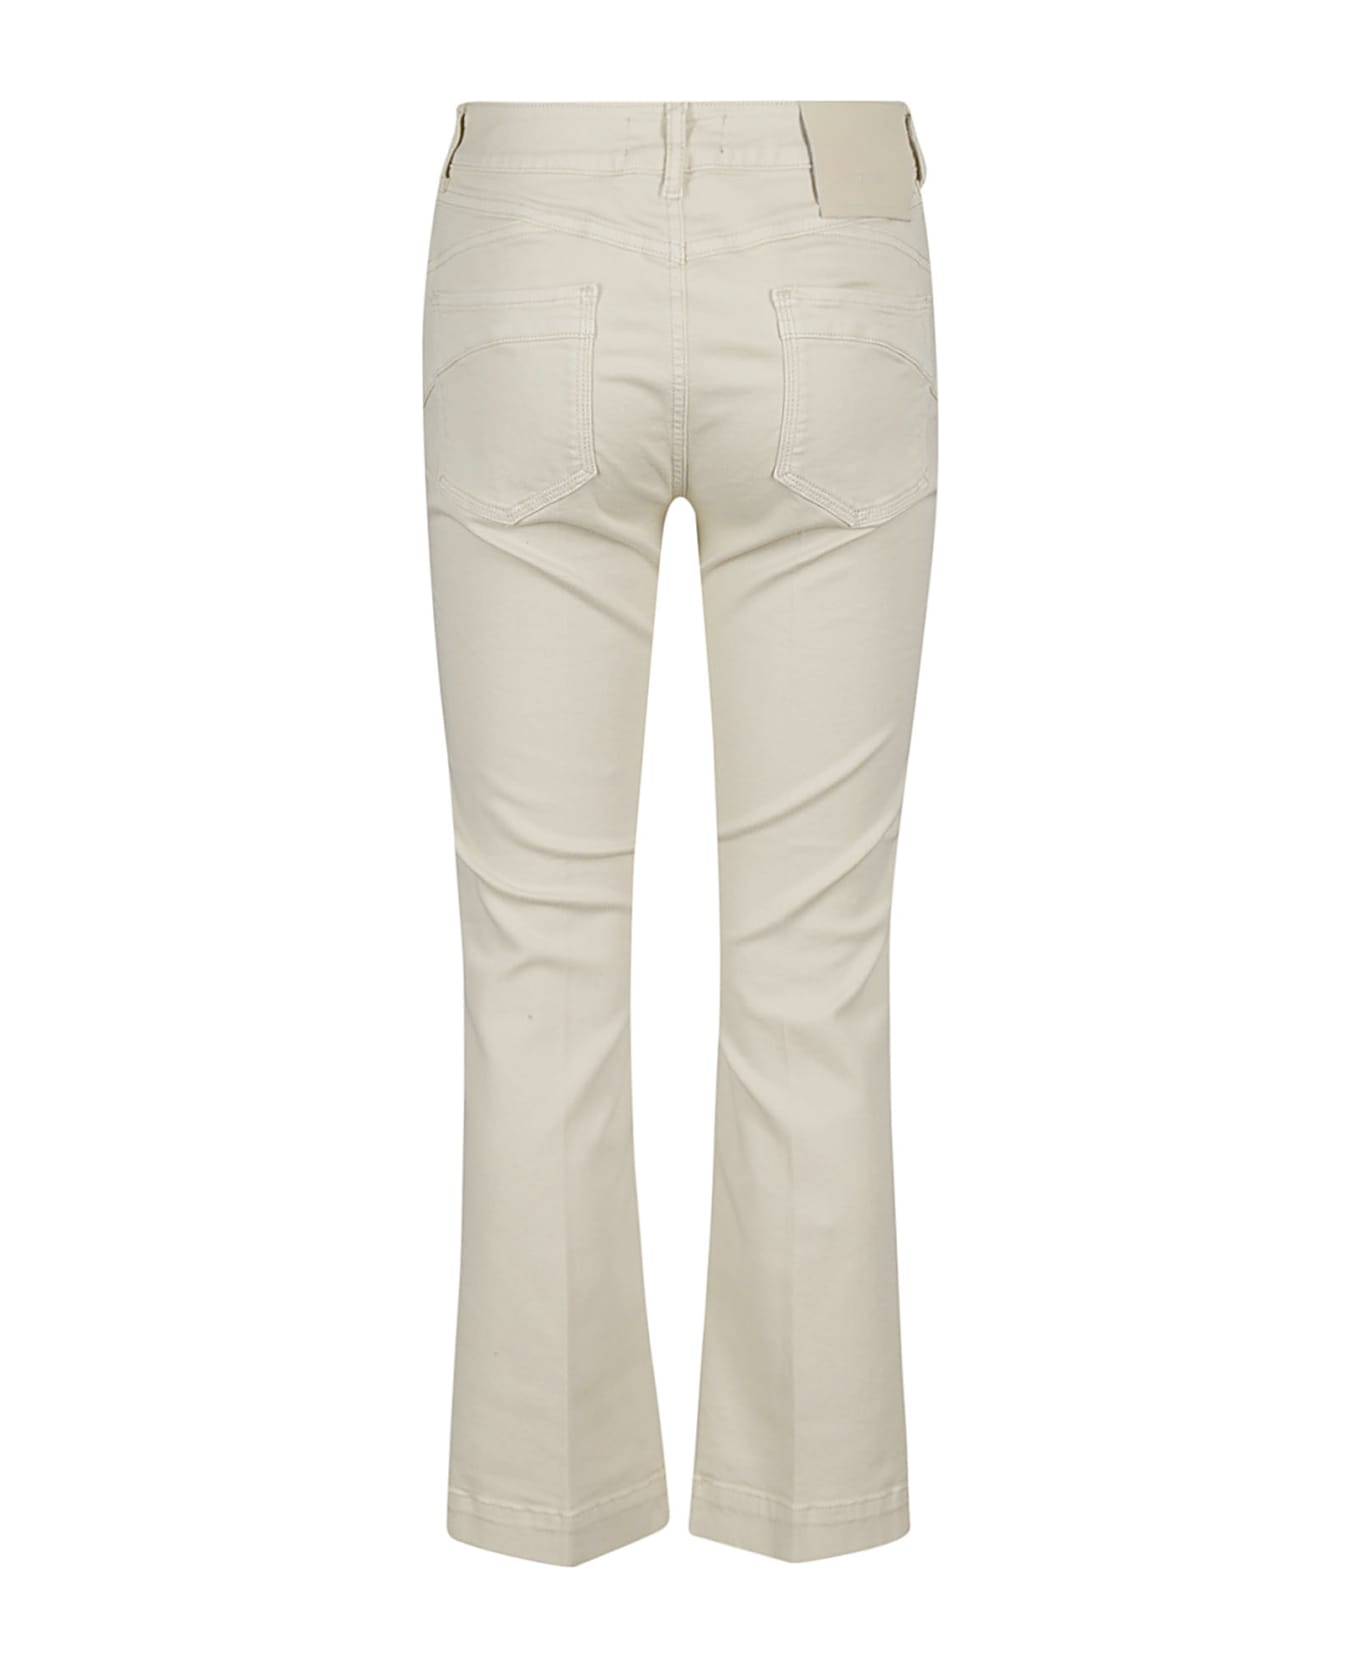 SportMax Nilly Button Detailed Straight Leg Jeans - Avorio